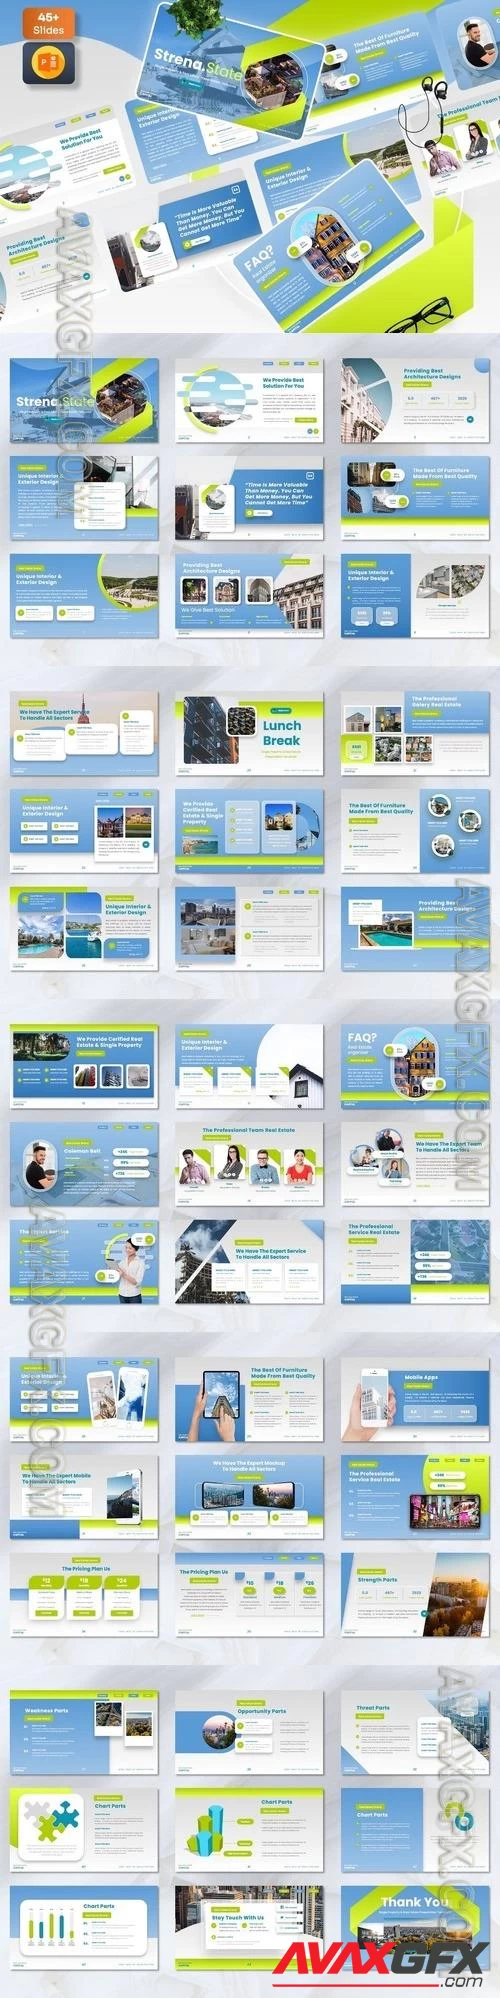 Strena - Real Estate PowerPoint, Keynote and Google Slides Templates